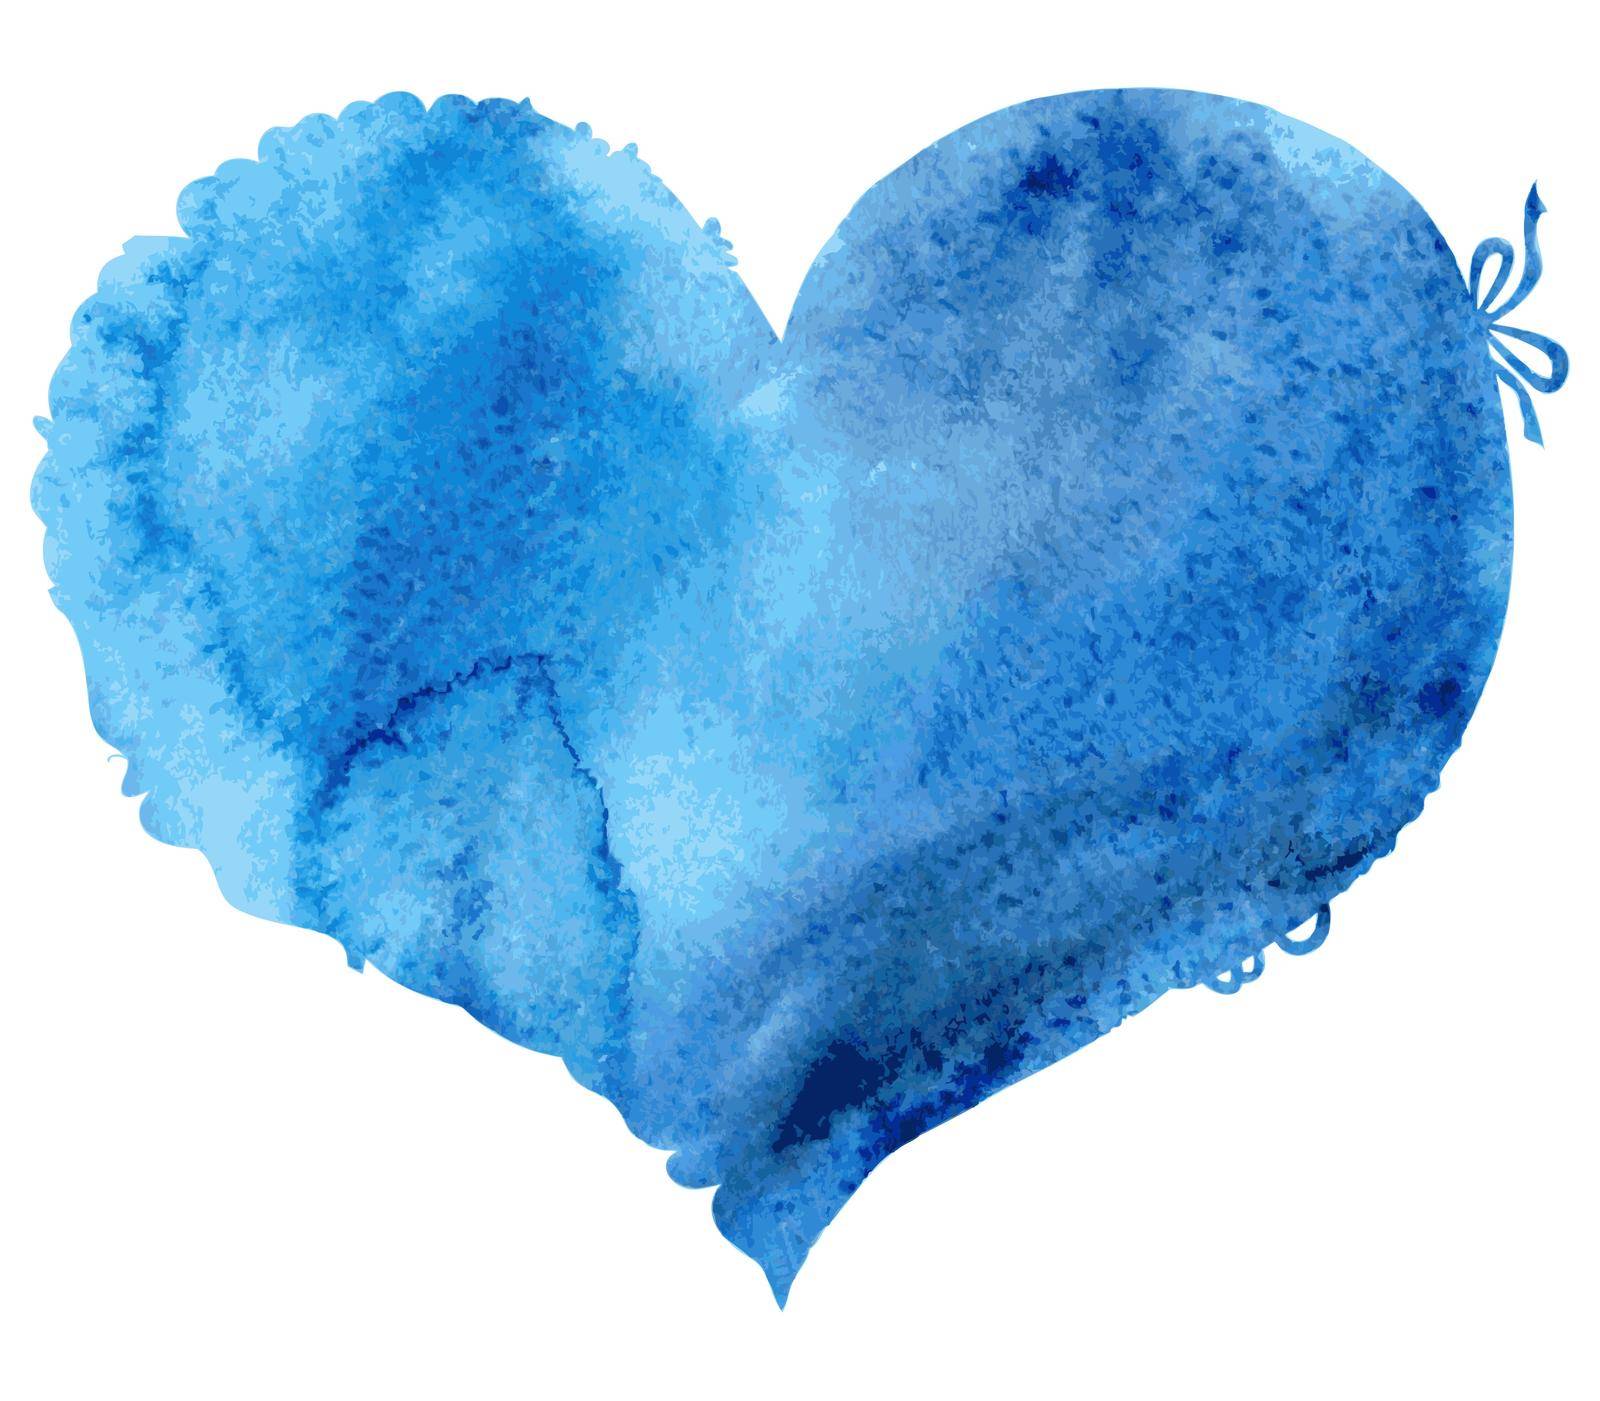 watercolor blue heart with light and shade, painted by hand